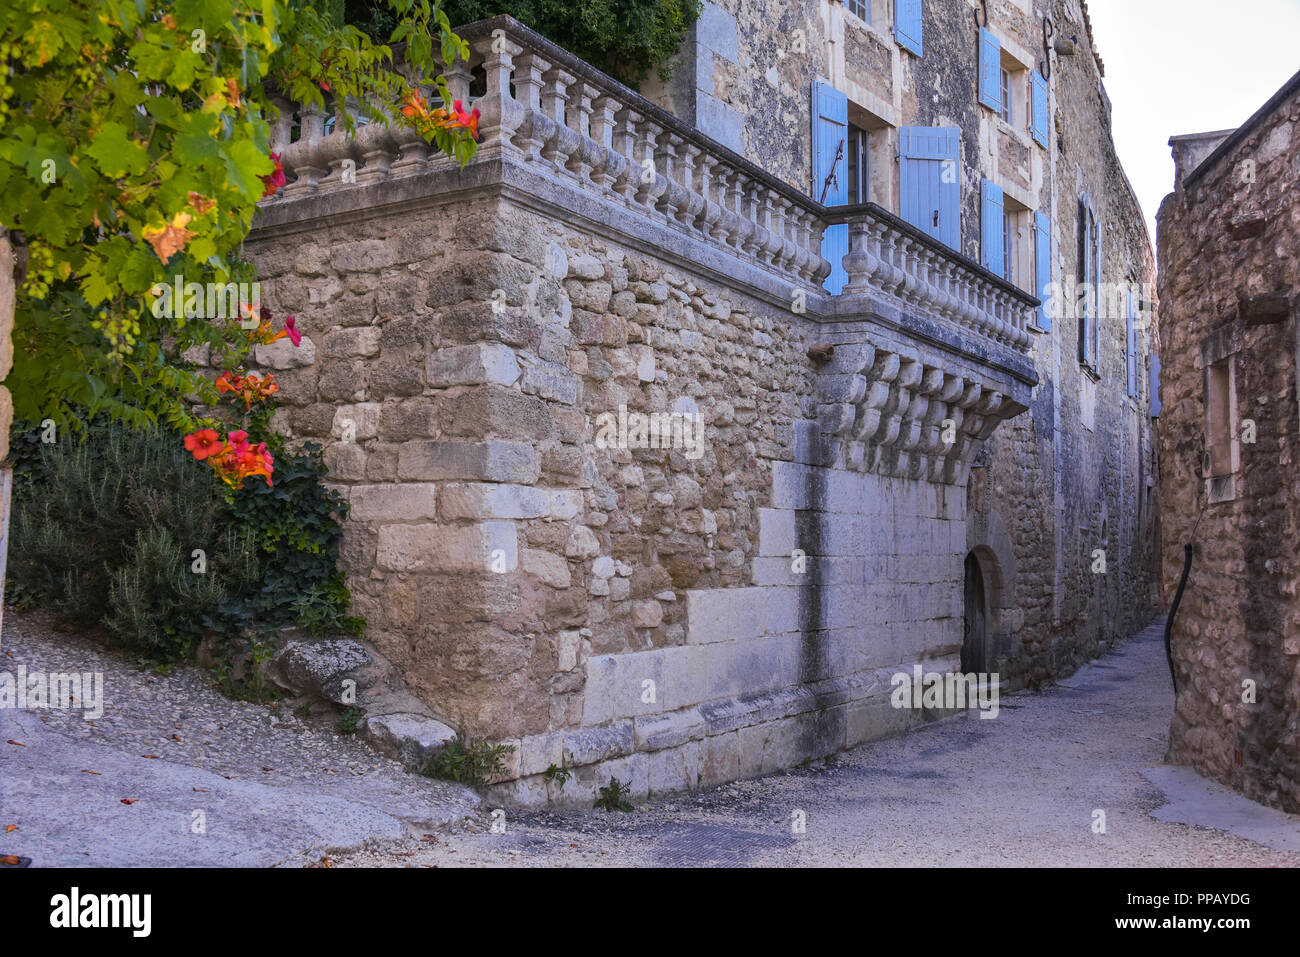 old village of the Provence, Ménerbes, France, situated on a hill, department Vaucluse, Luberon mountains, region Provence-Alpes-Côte d'Azur Stock Photo